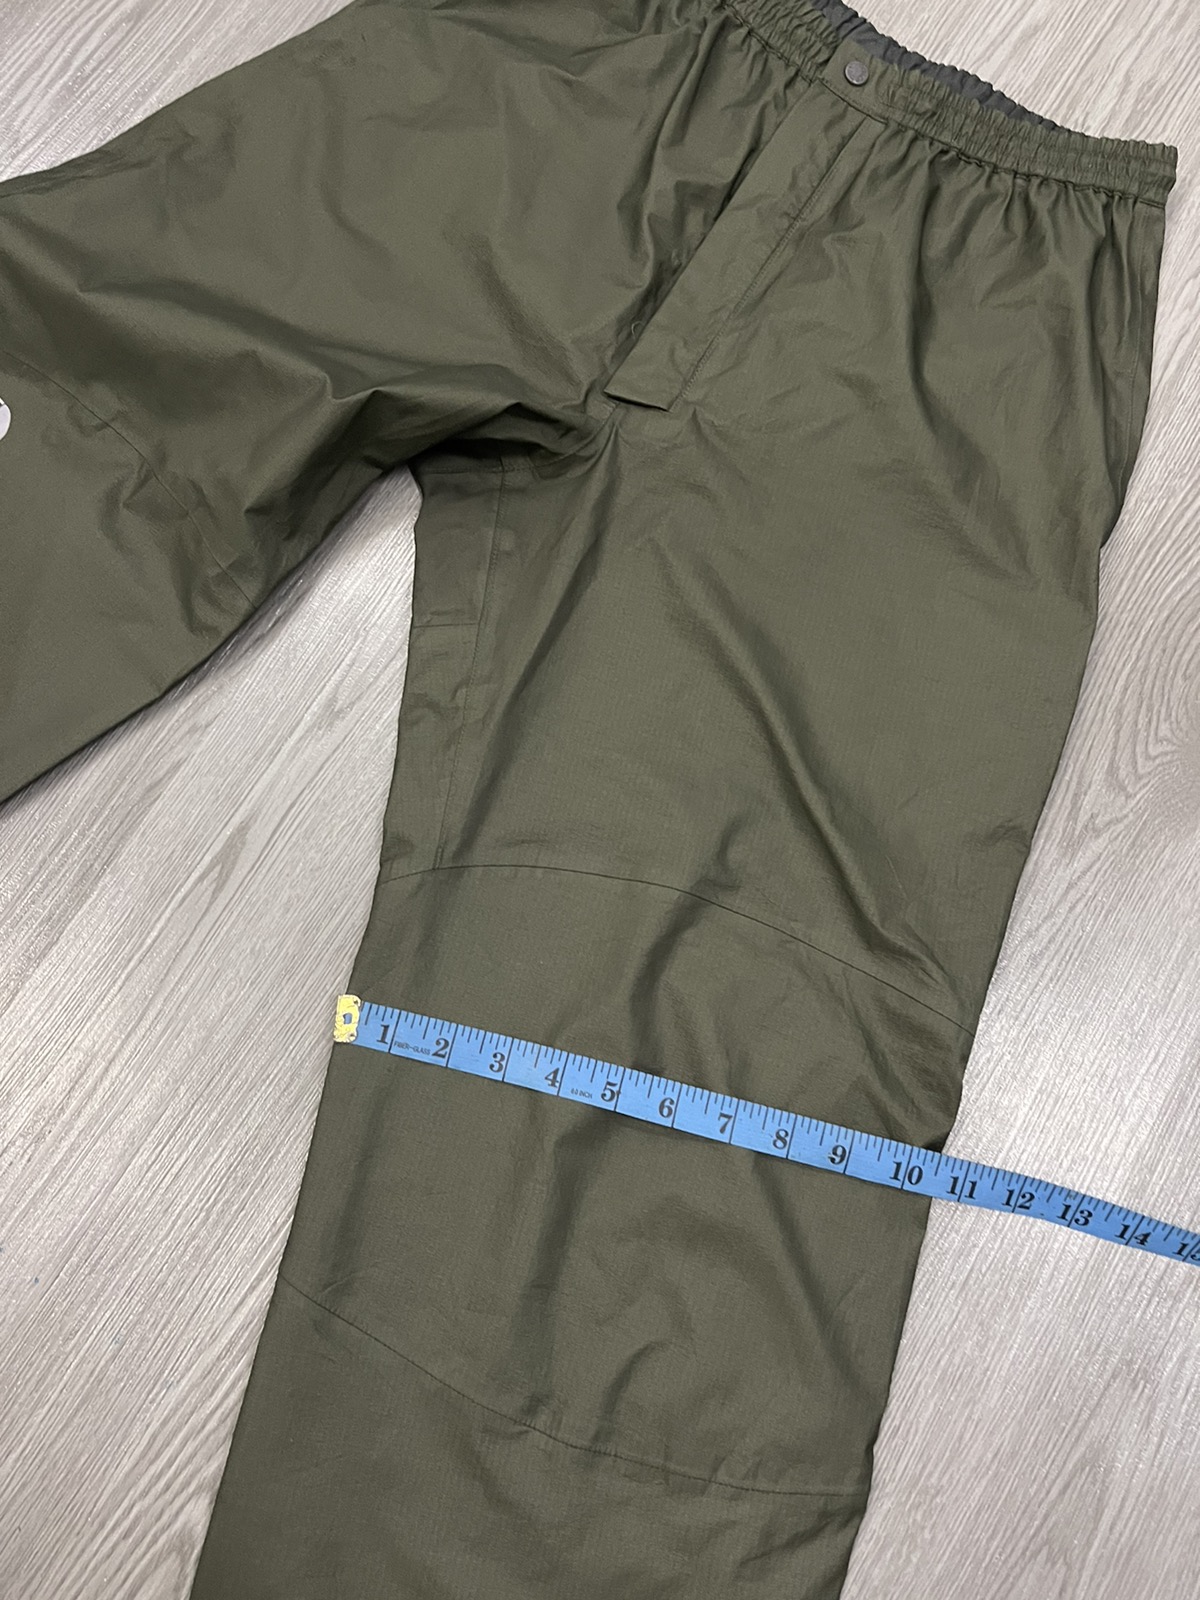 Gorpcore deal🔥The North Face Goretex pant in green - 15